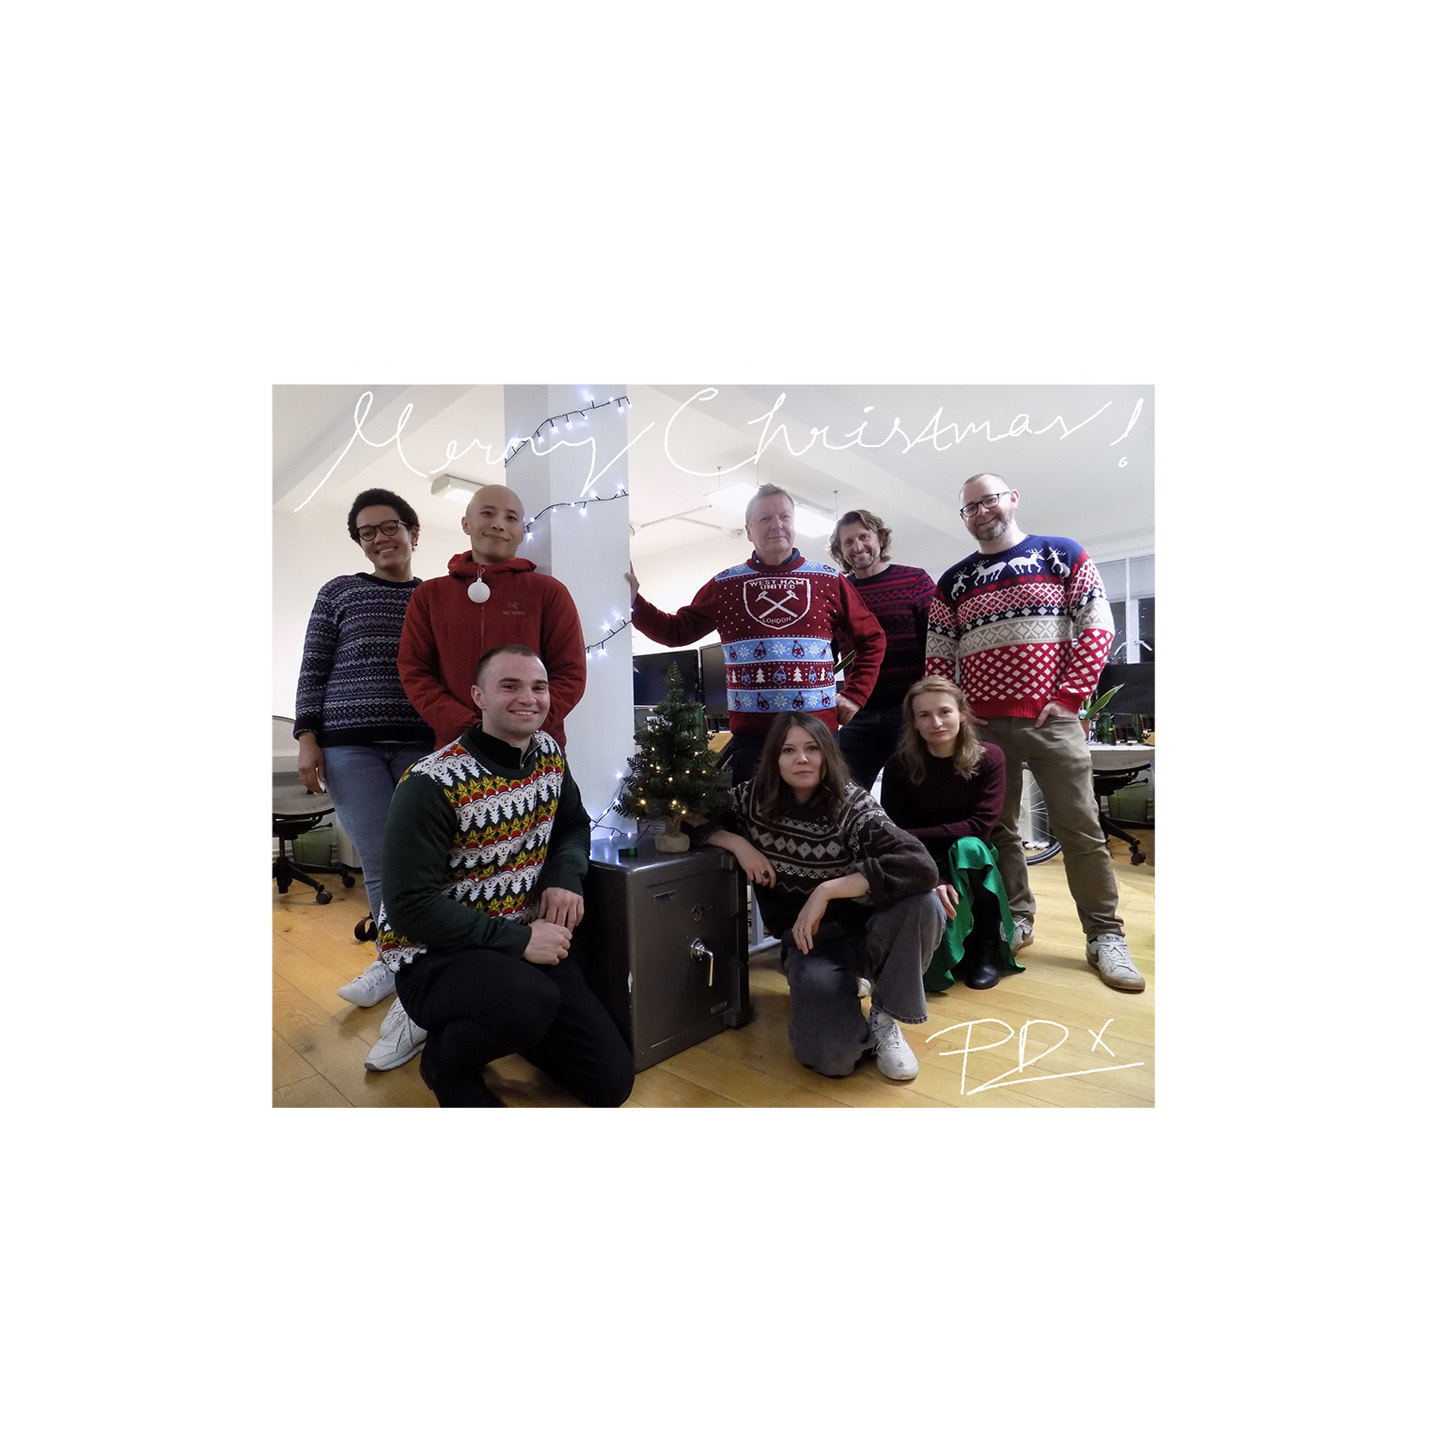 peter dann crhsitmas jumper day 2023 london office structural engineers